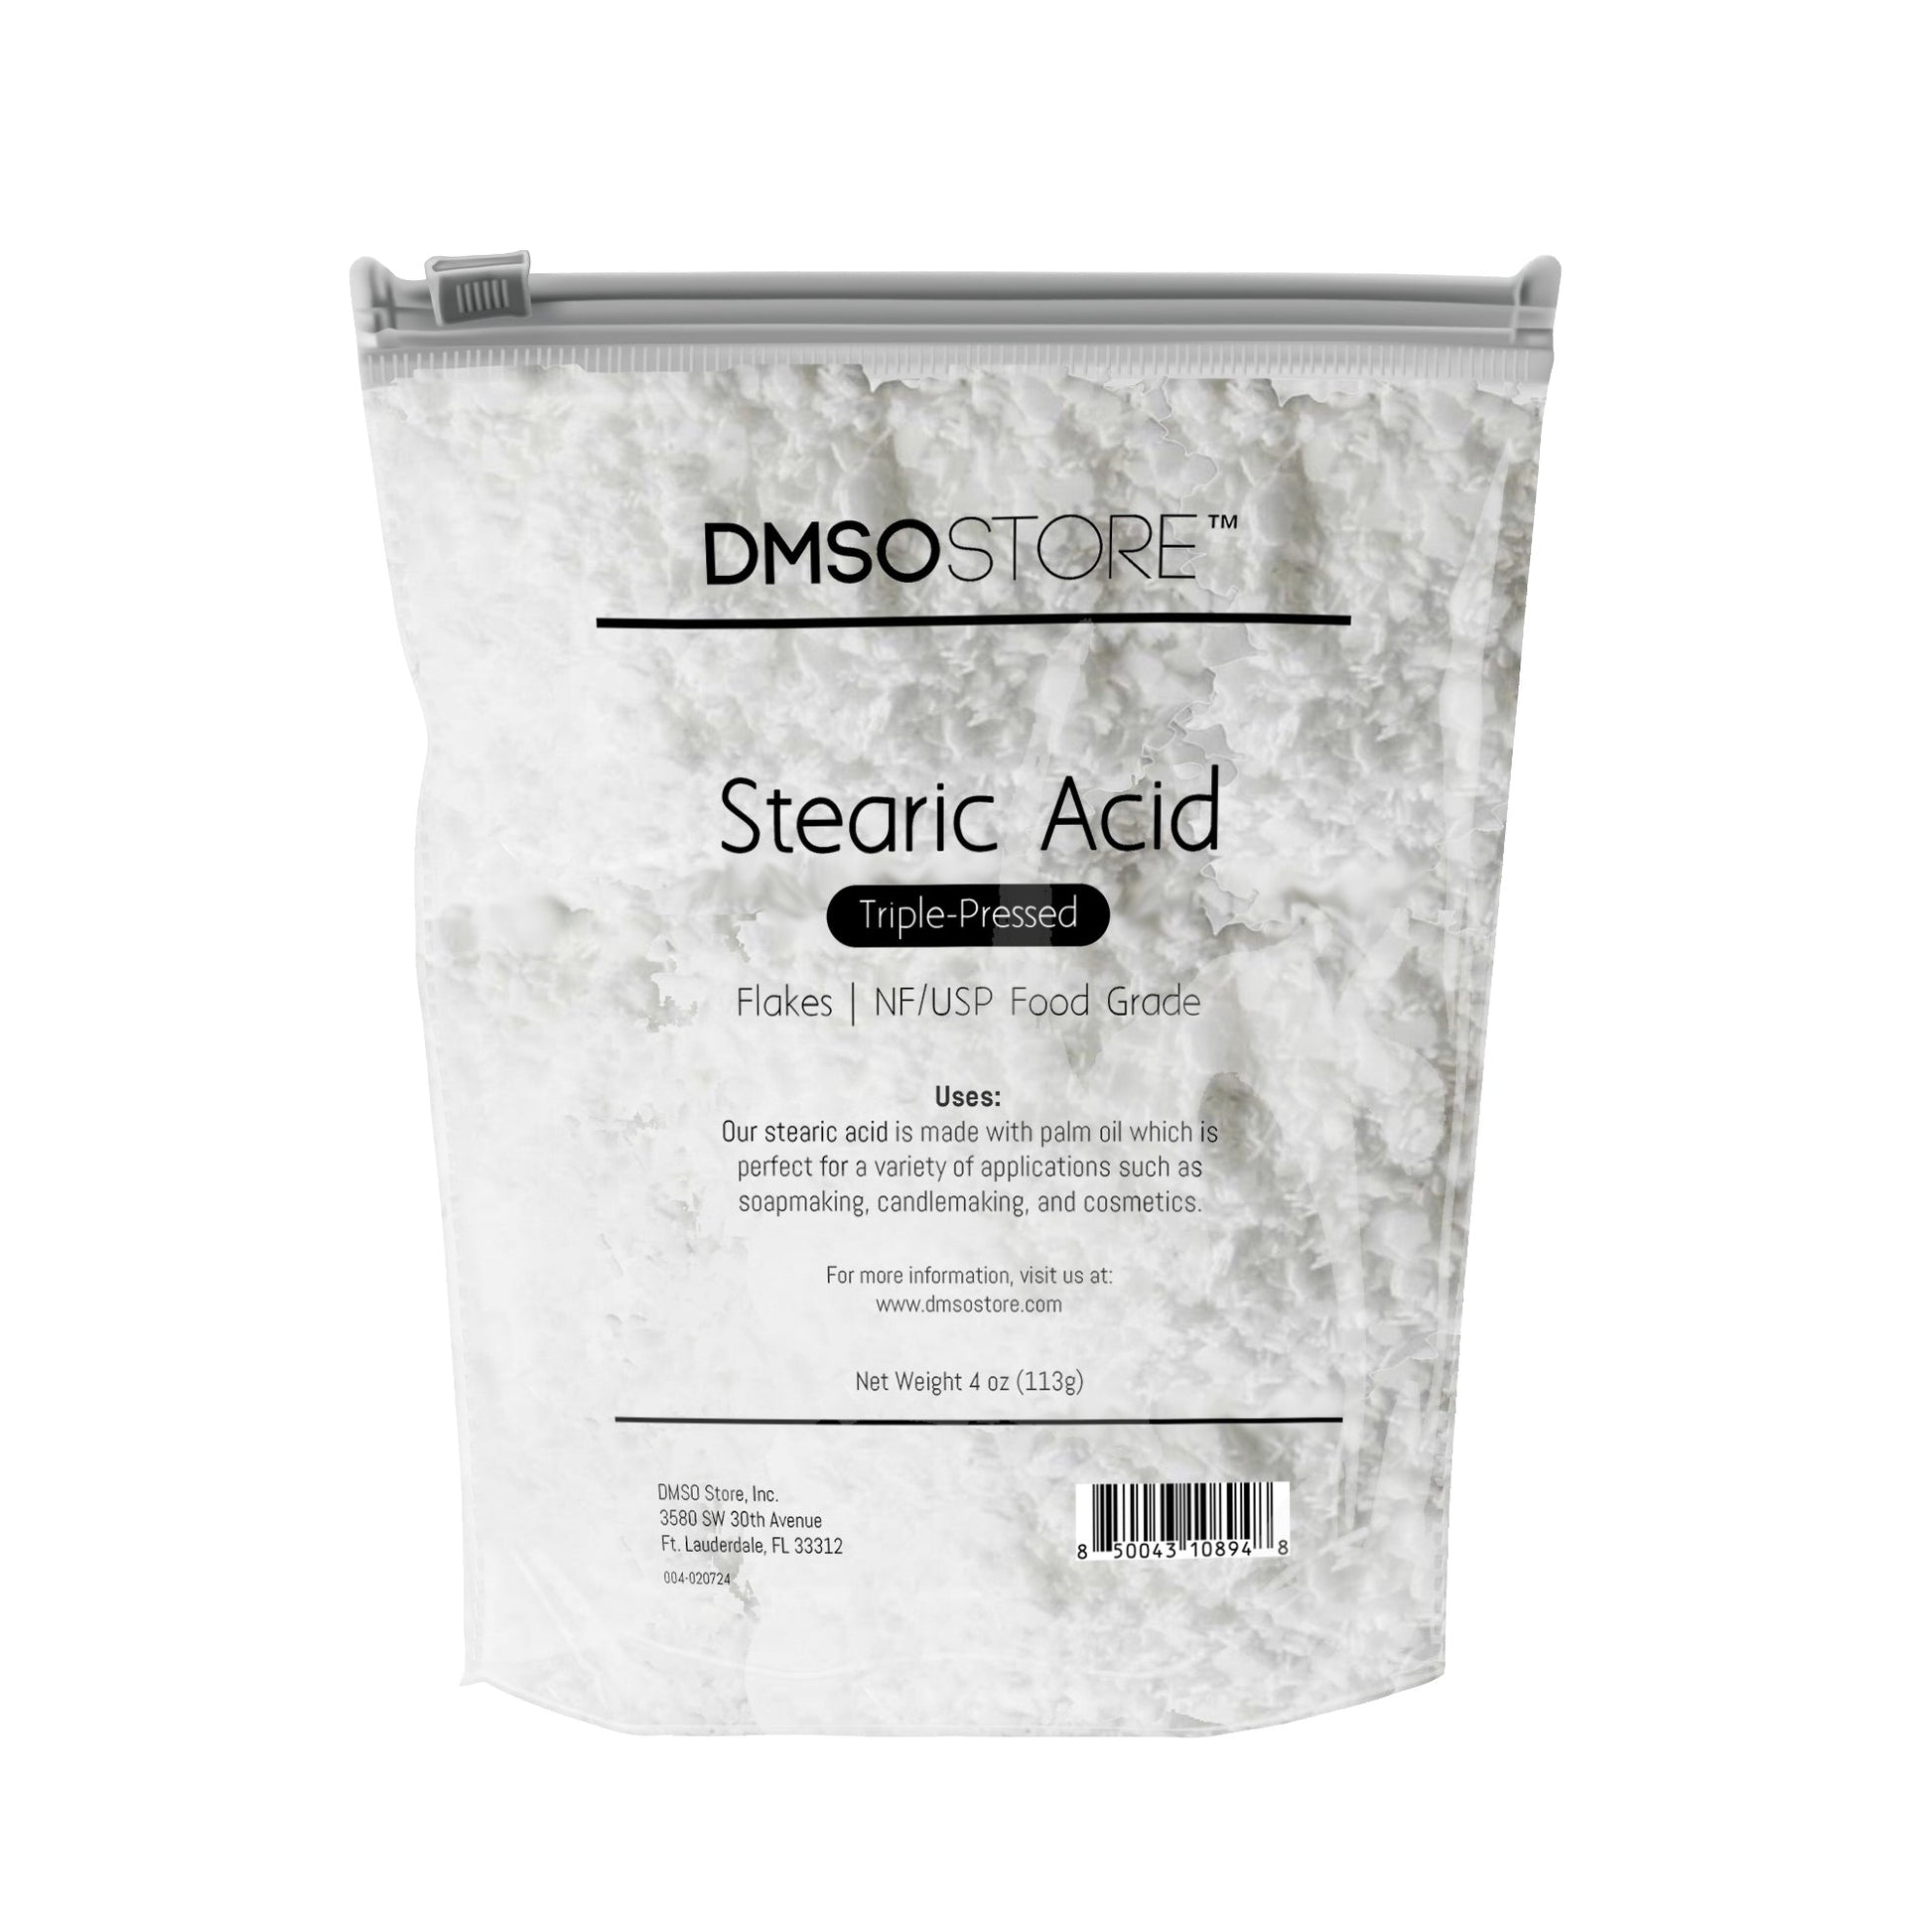 4 oz. DMSO Store brand Stearic Acid flakes, triple-pressed and NF/USP food grade, for soap making, candle making, and cosmetics. 